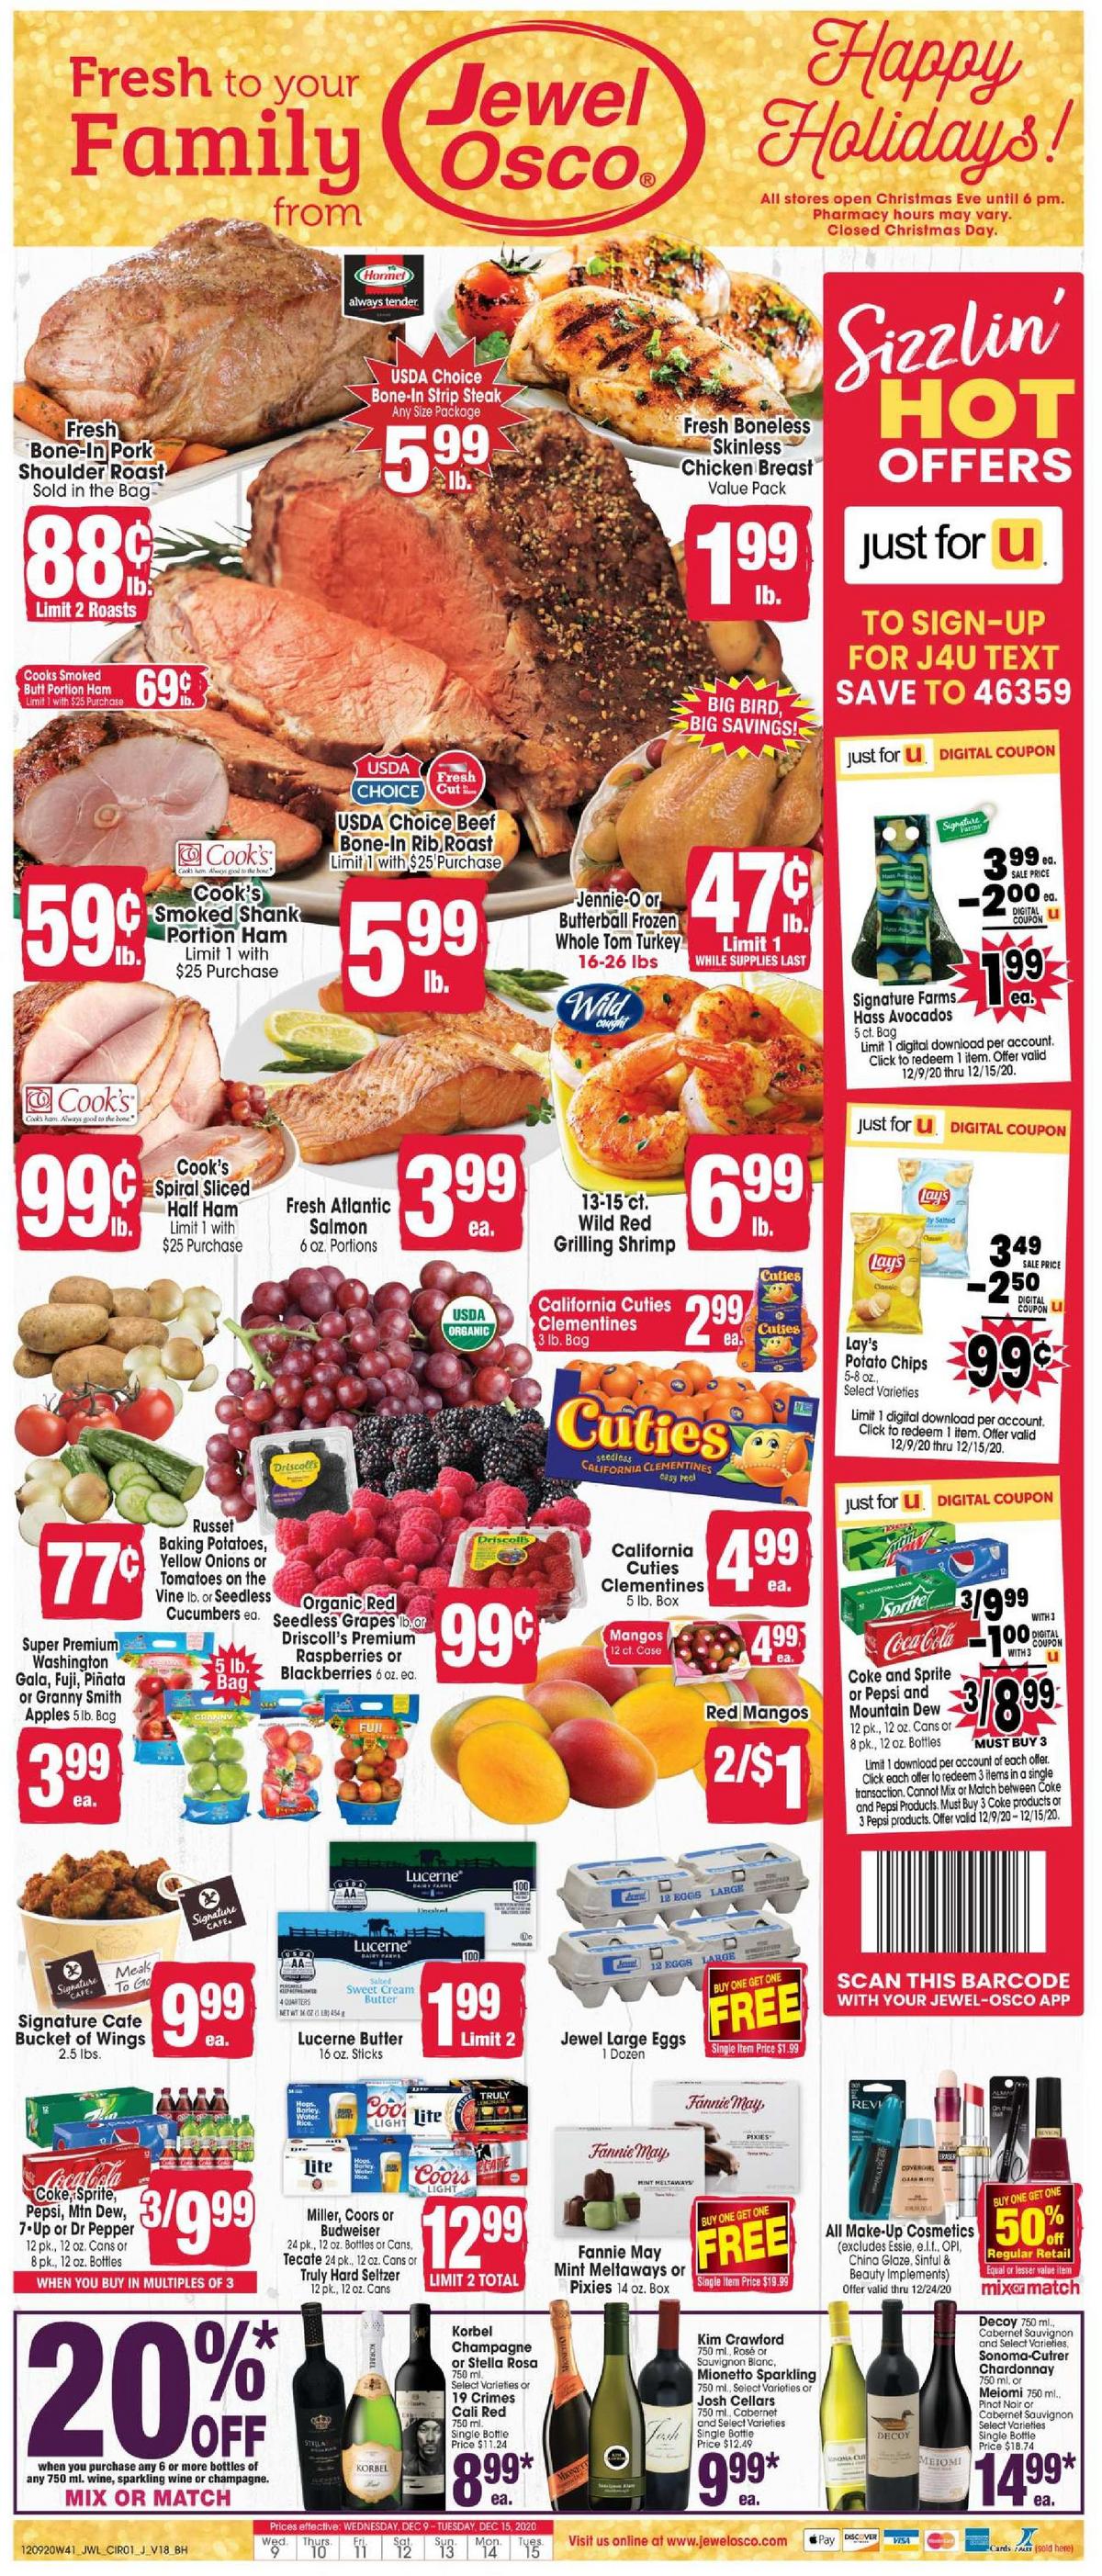 Jewel Osco Weekly Ad from December 9